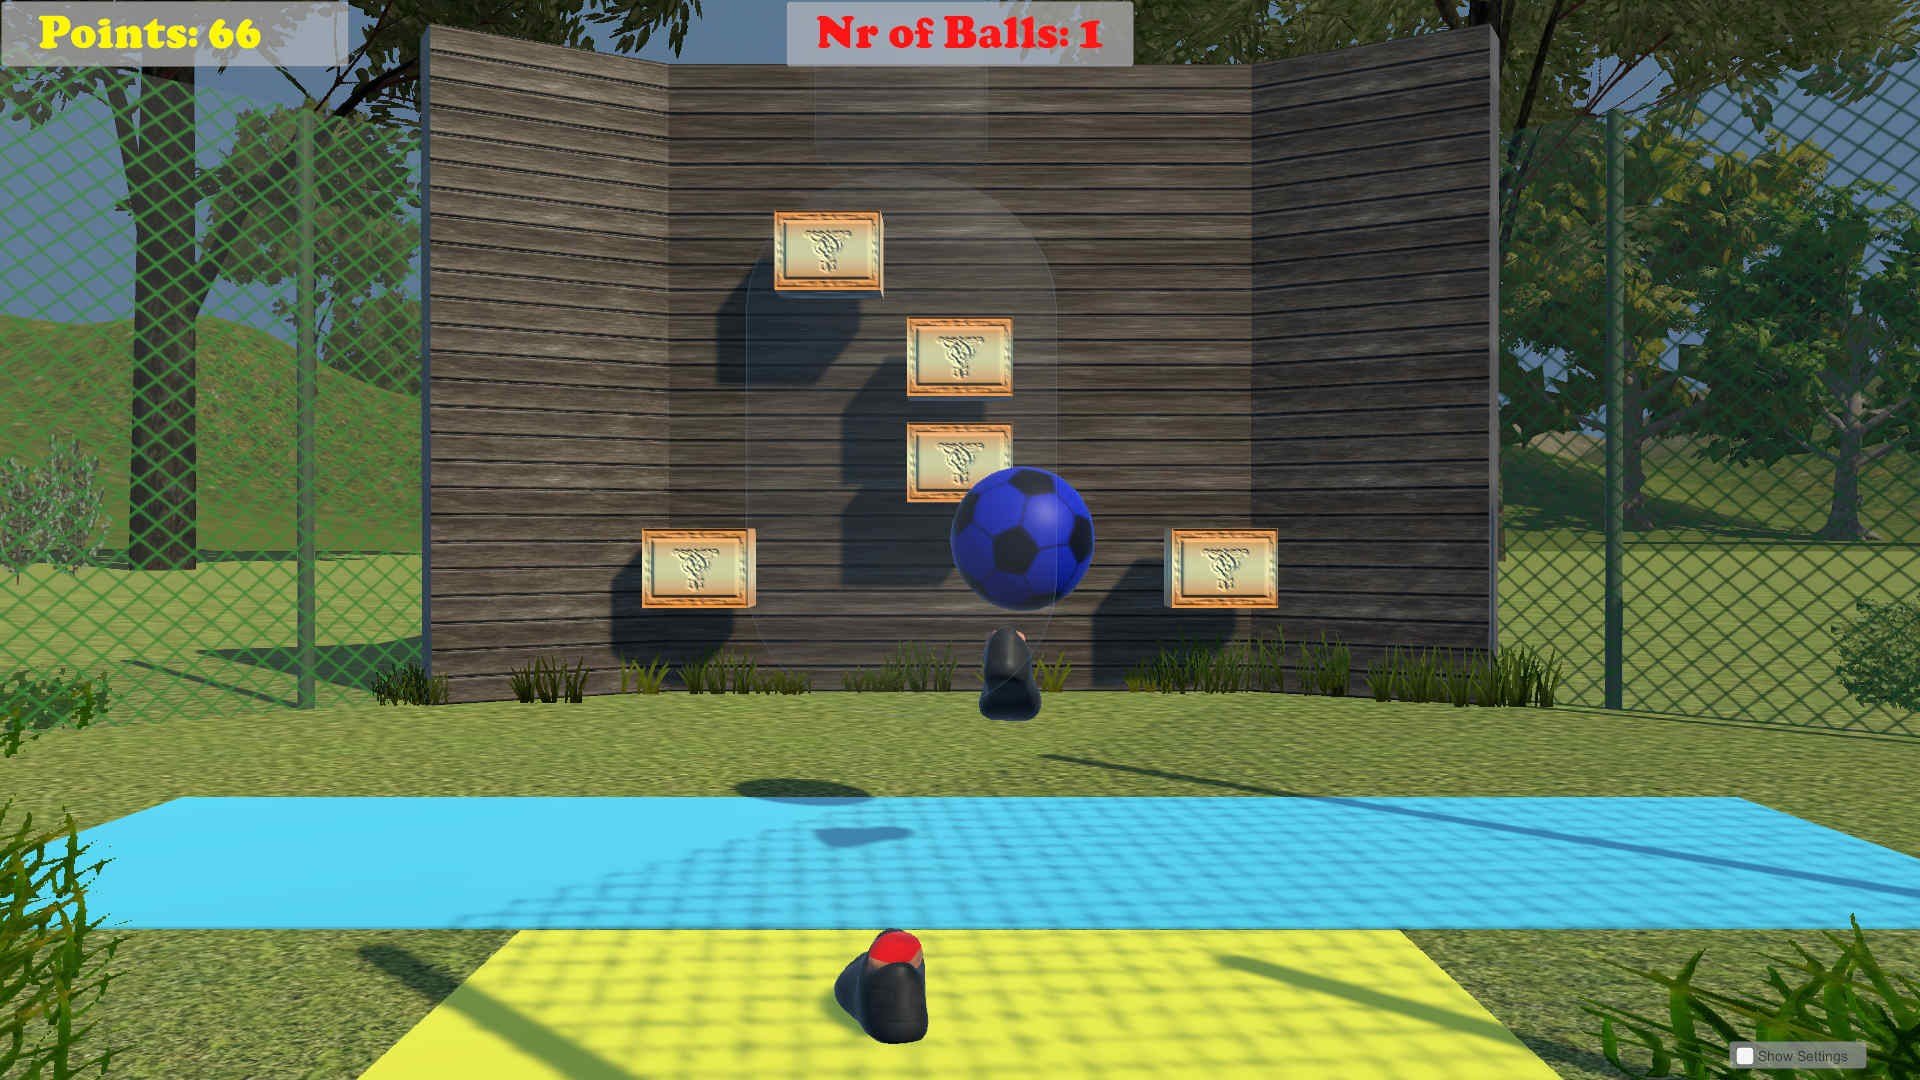 Check out Wall Ball, a Kinect for Windows game available in Windows Store